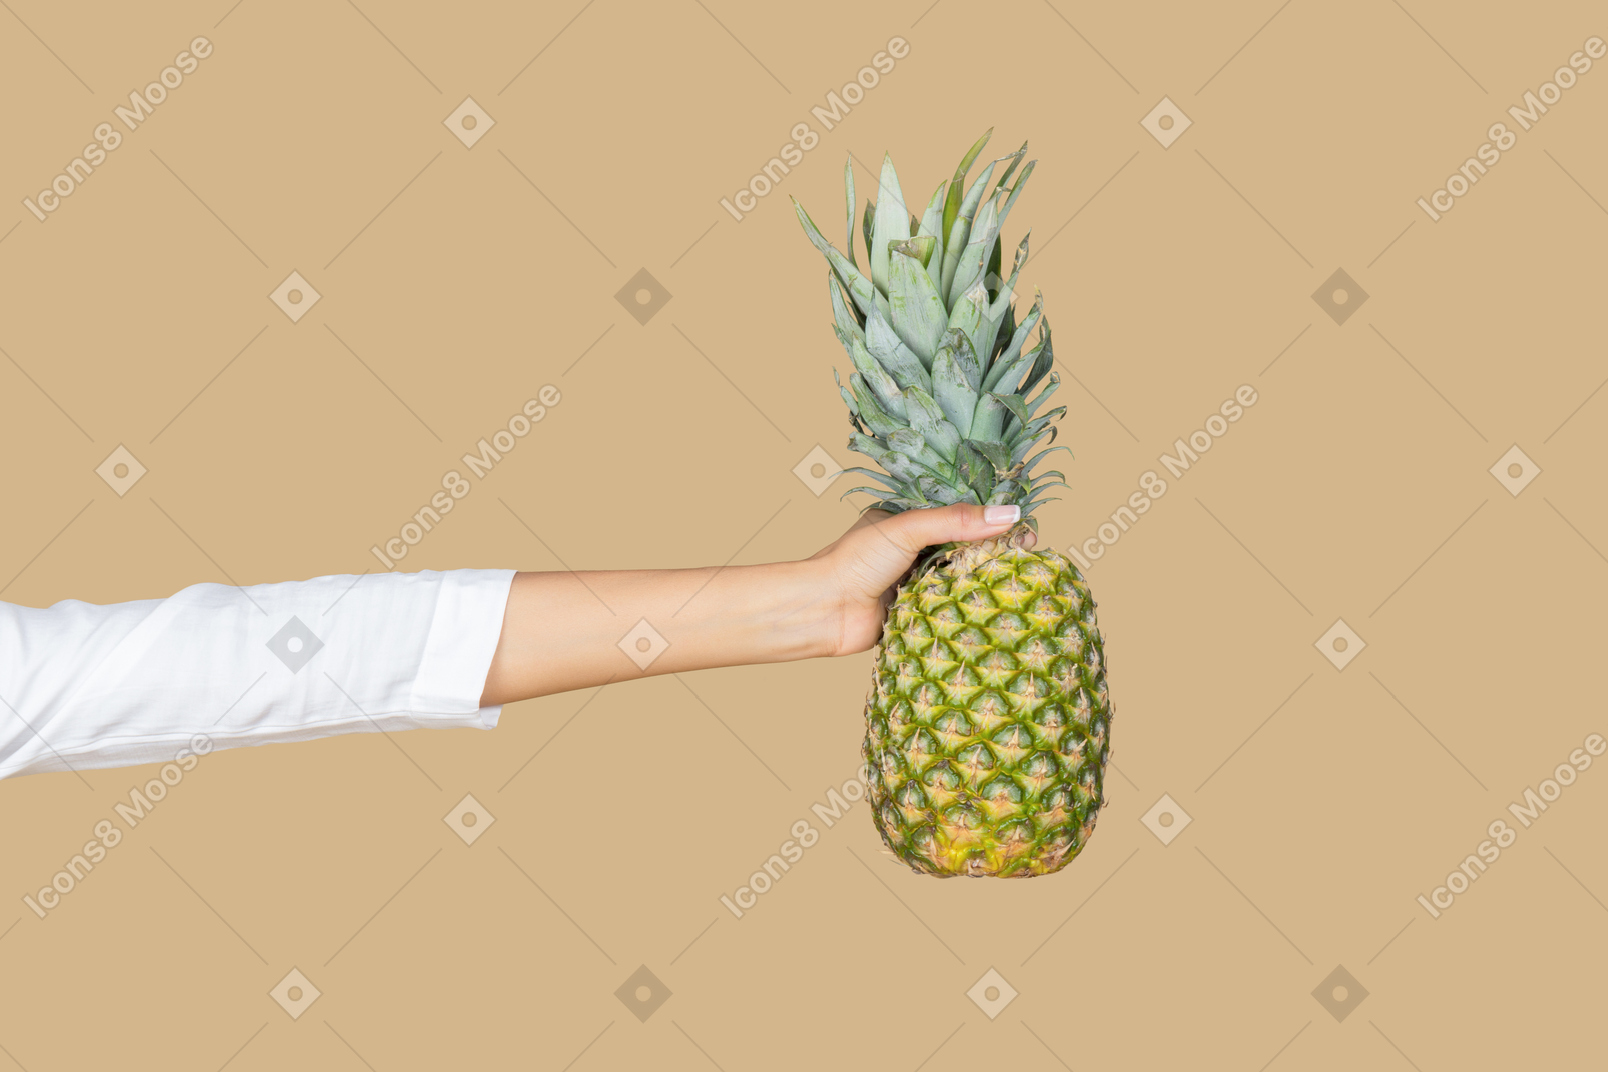 Eat pineapple for a lunch